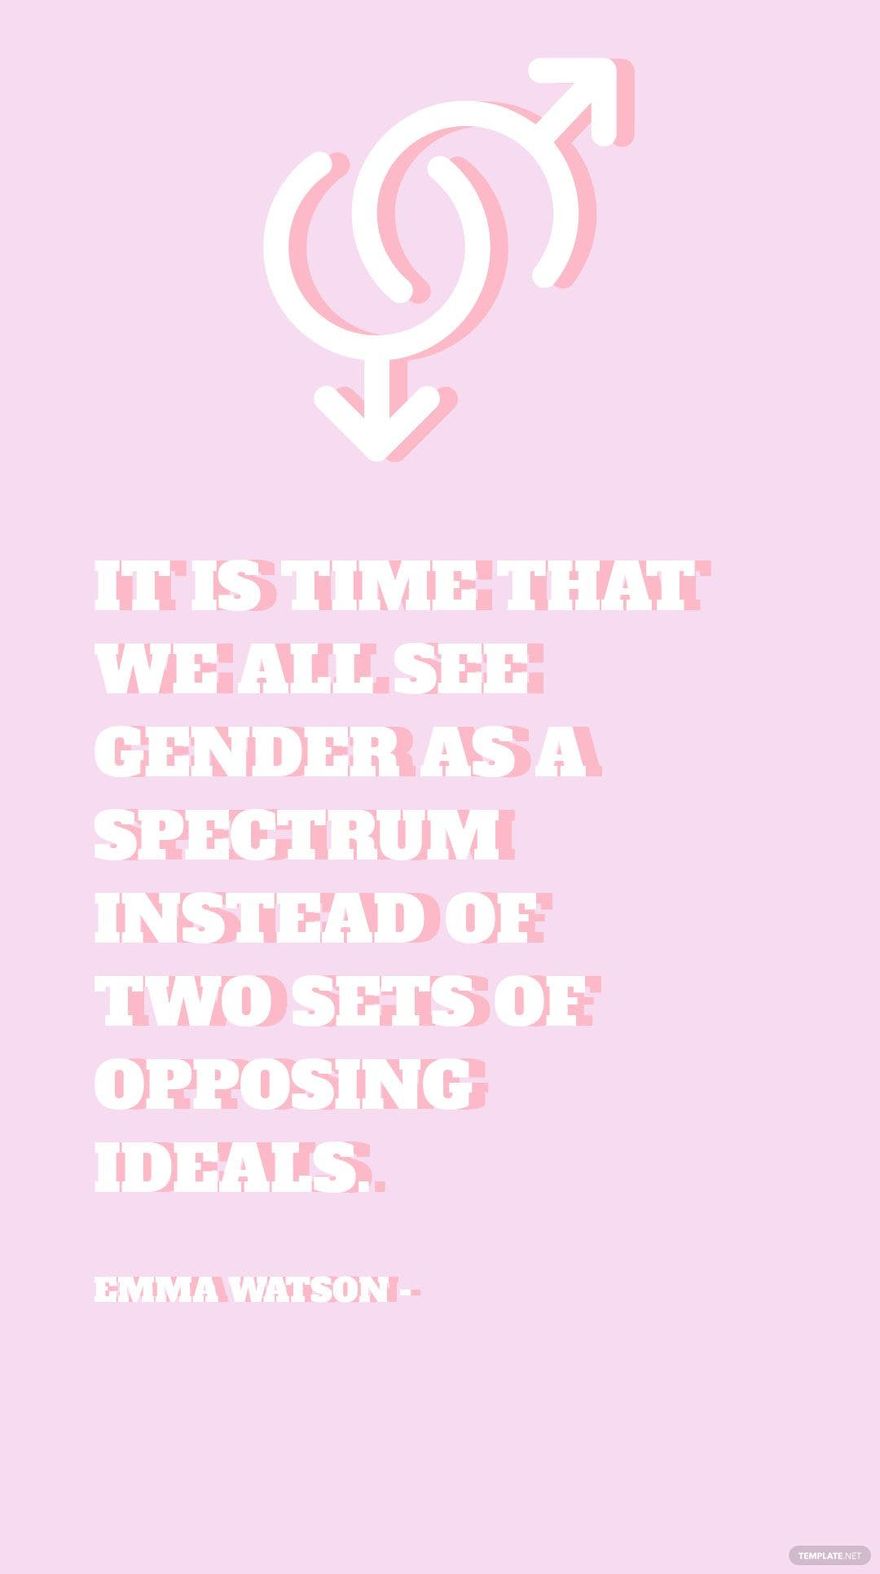 Free Emma Watson - It is time that we all see gender as a spectrum instead of two sets of opposing ideals. in JPG